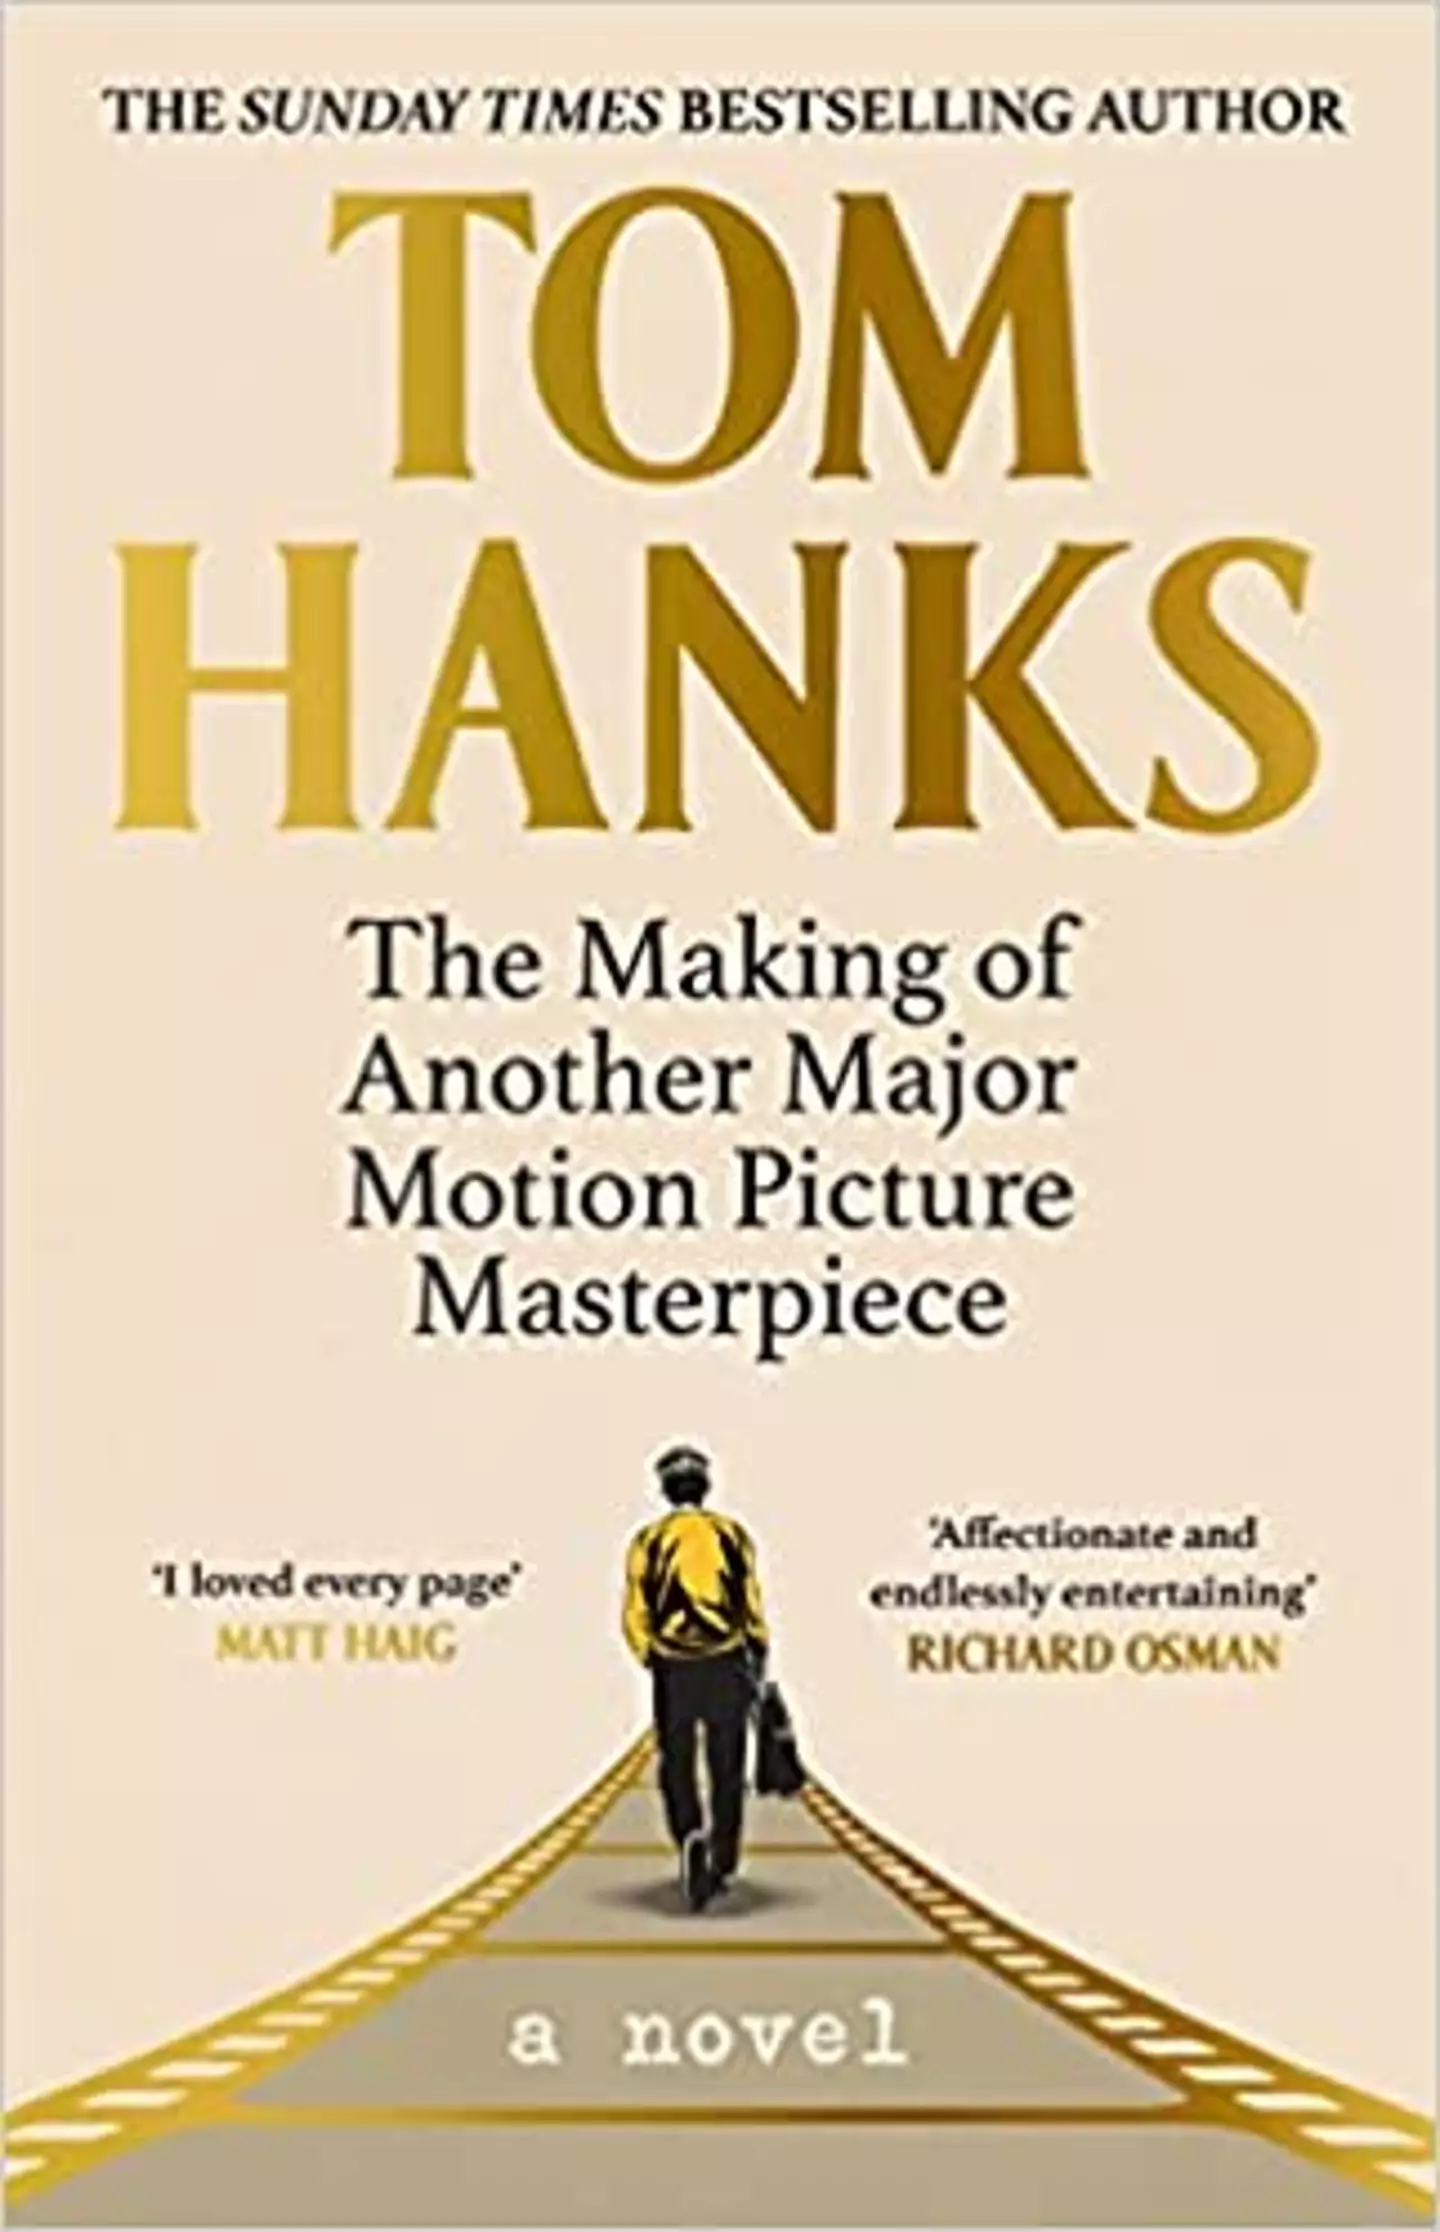 'The Making of Another Major Motion Picture Masterpiece' is Hanks' debut novel.